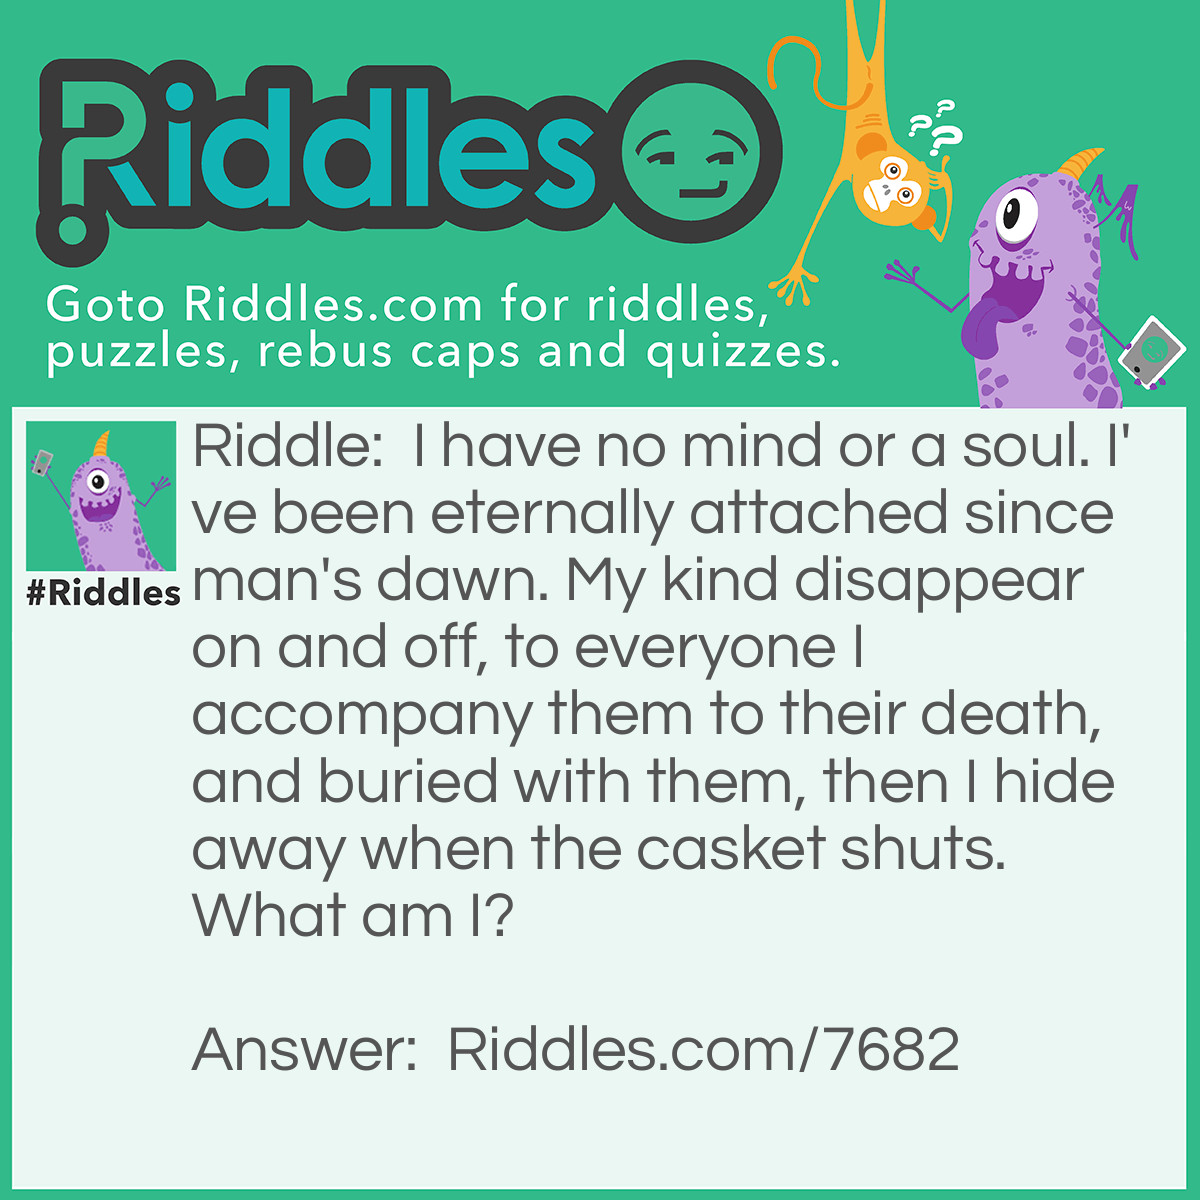 Riddle: I have no mind or a soul. I've been eternally attached since man's dawn. My kind disappear on and off, to everyone I accompany them to their death, and buried with them, then I hide away when the casket shuts. What am I? Answer: A shadow.